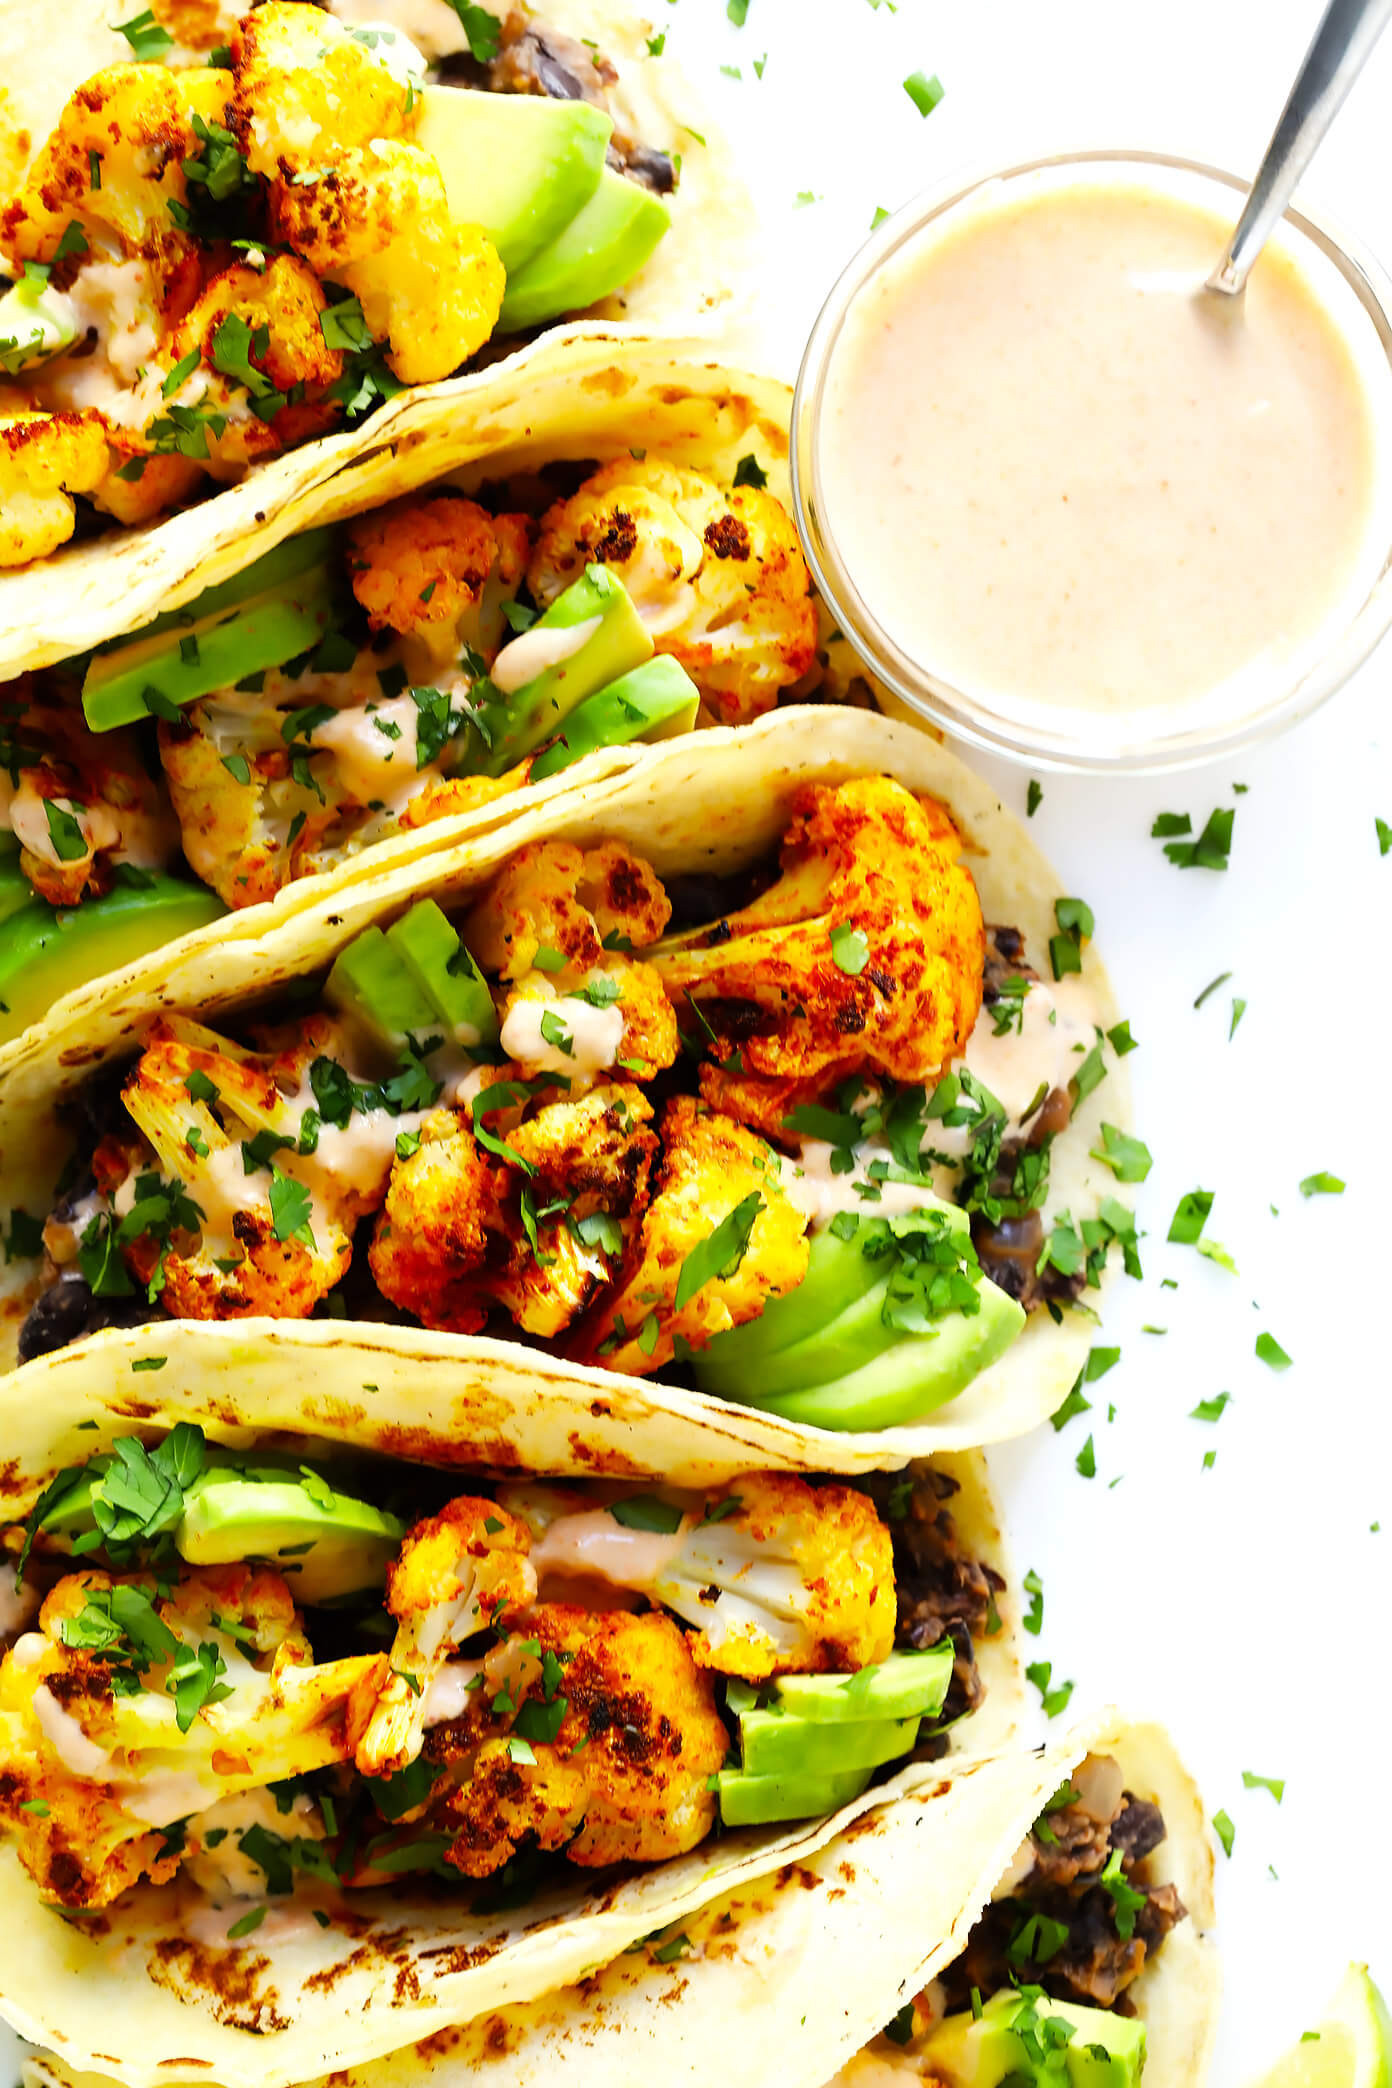 Delicious Healthy Dinner Recipes
 Roasted Cauliflower and Black Bean Tacos